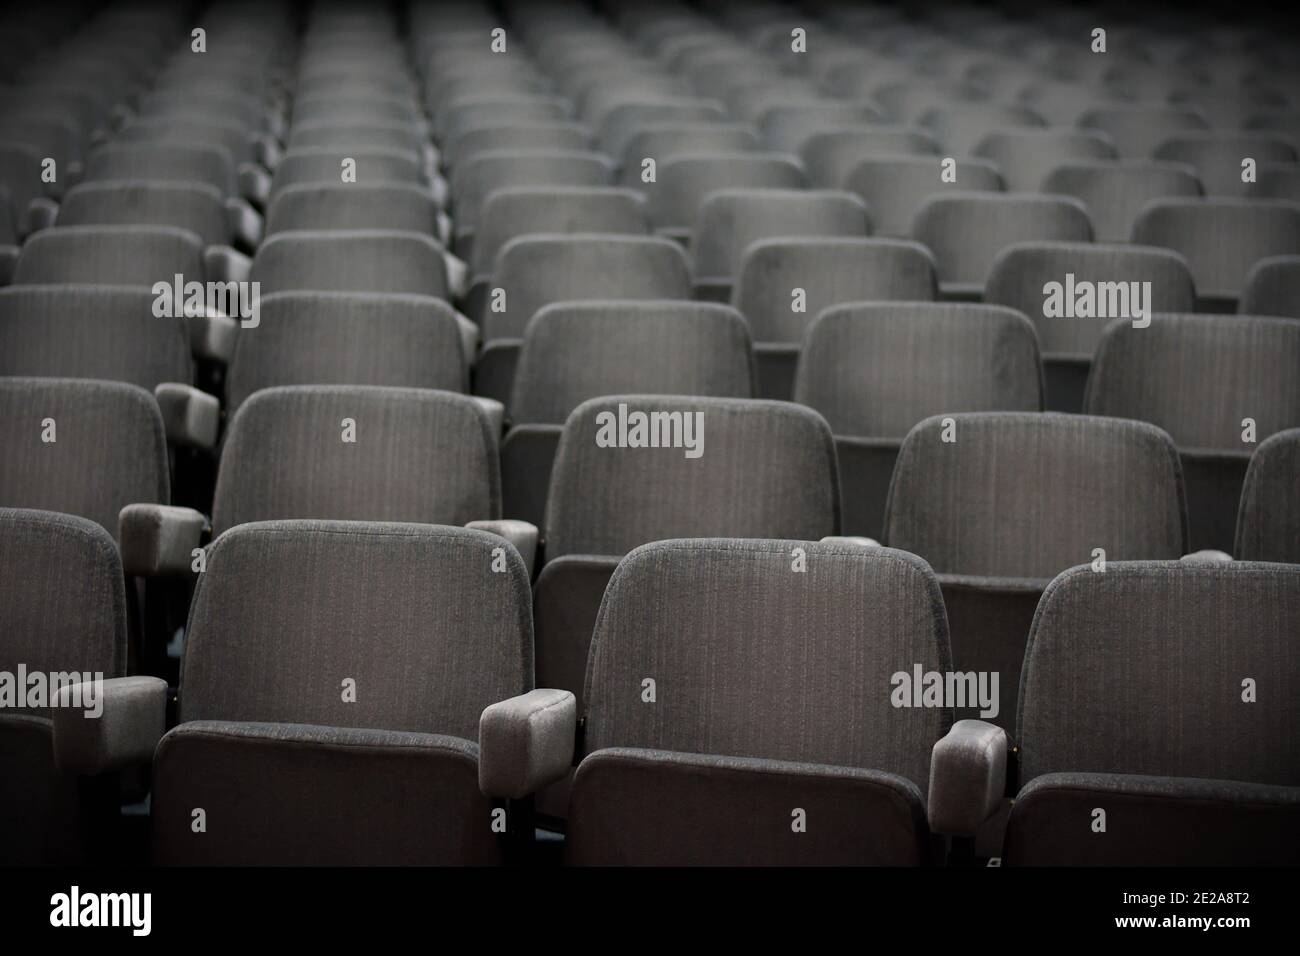 Empty rows of theater or movie seats. Stock Photo